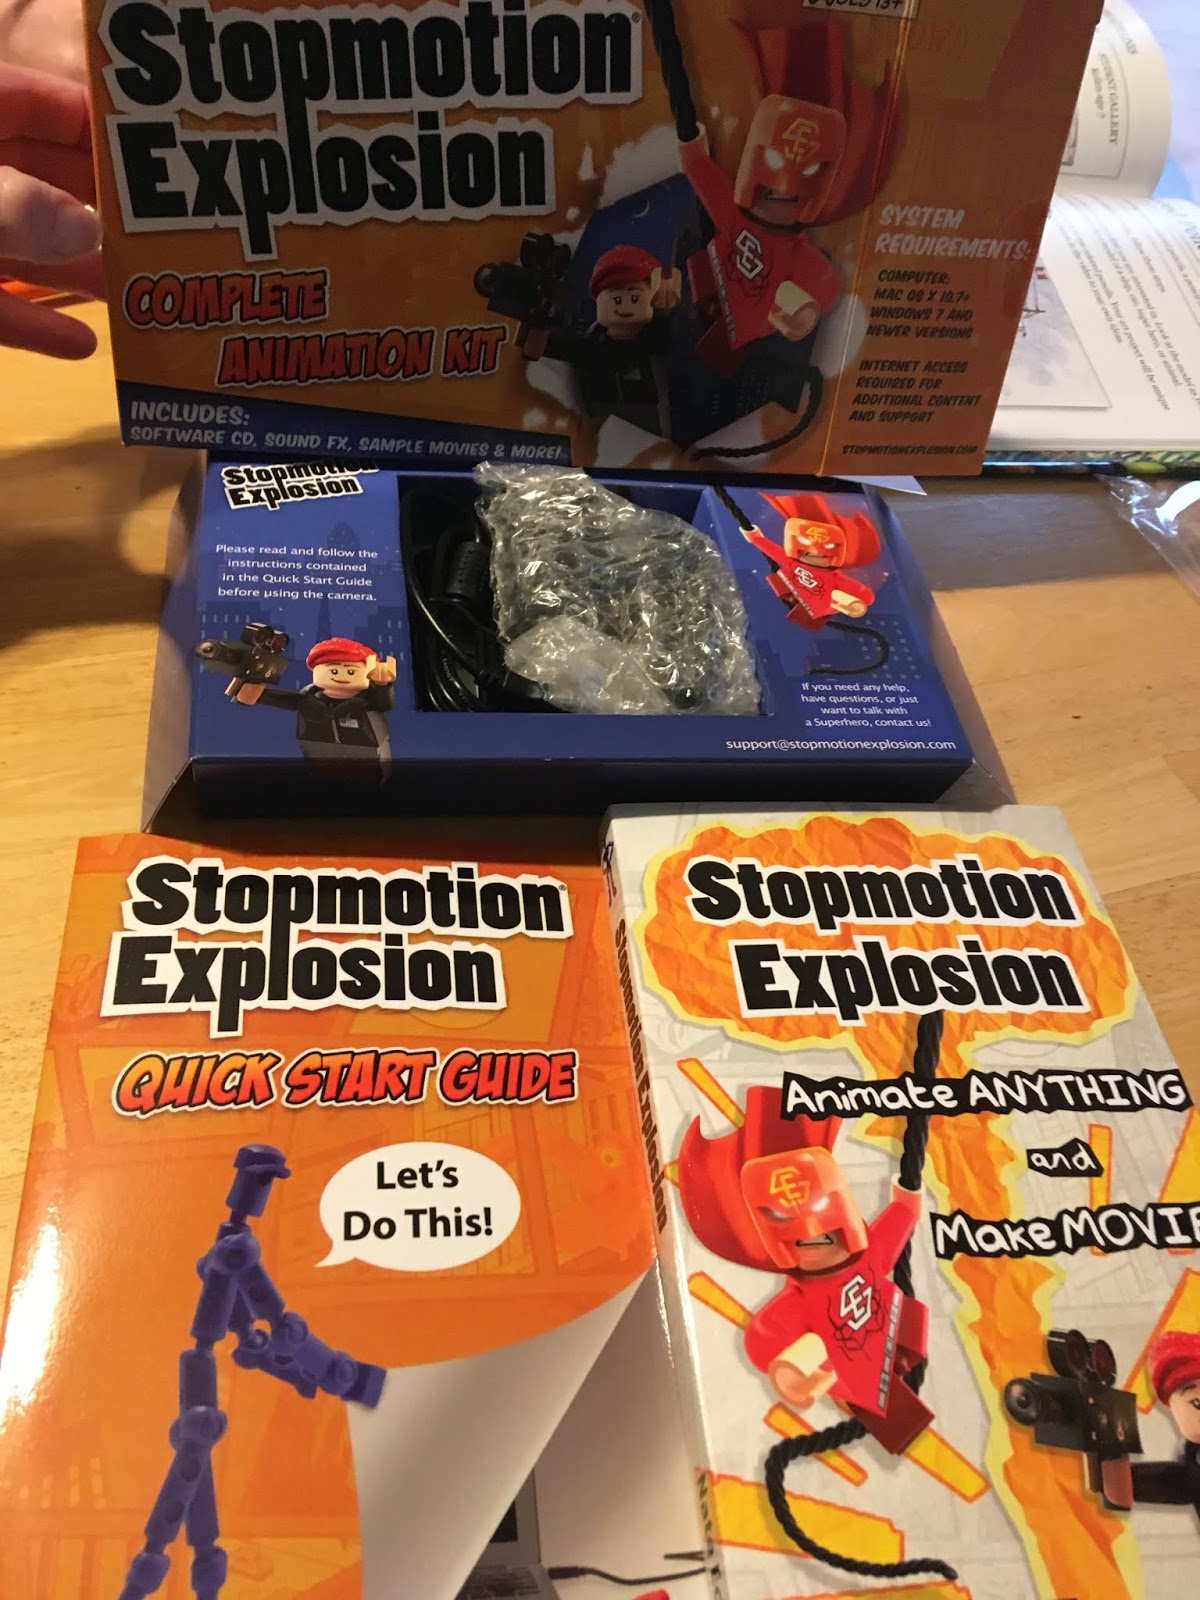  Stopmotion Explosion: Complete HD Stop Motion Animation Kit   Stop Motion Animation Software with Full HD 1080P Camera, Animation  Software & Book (Windows & OS X) : Electronics